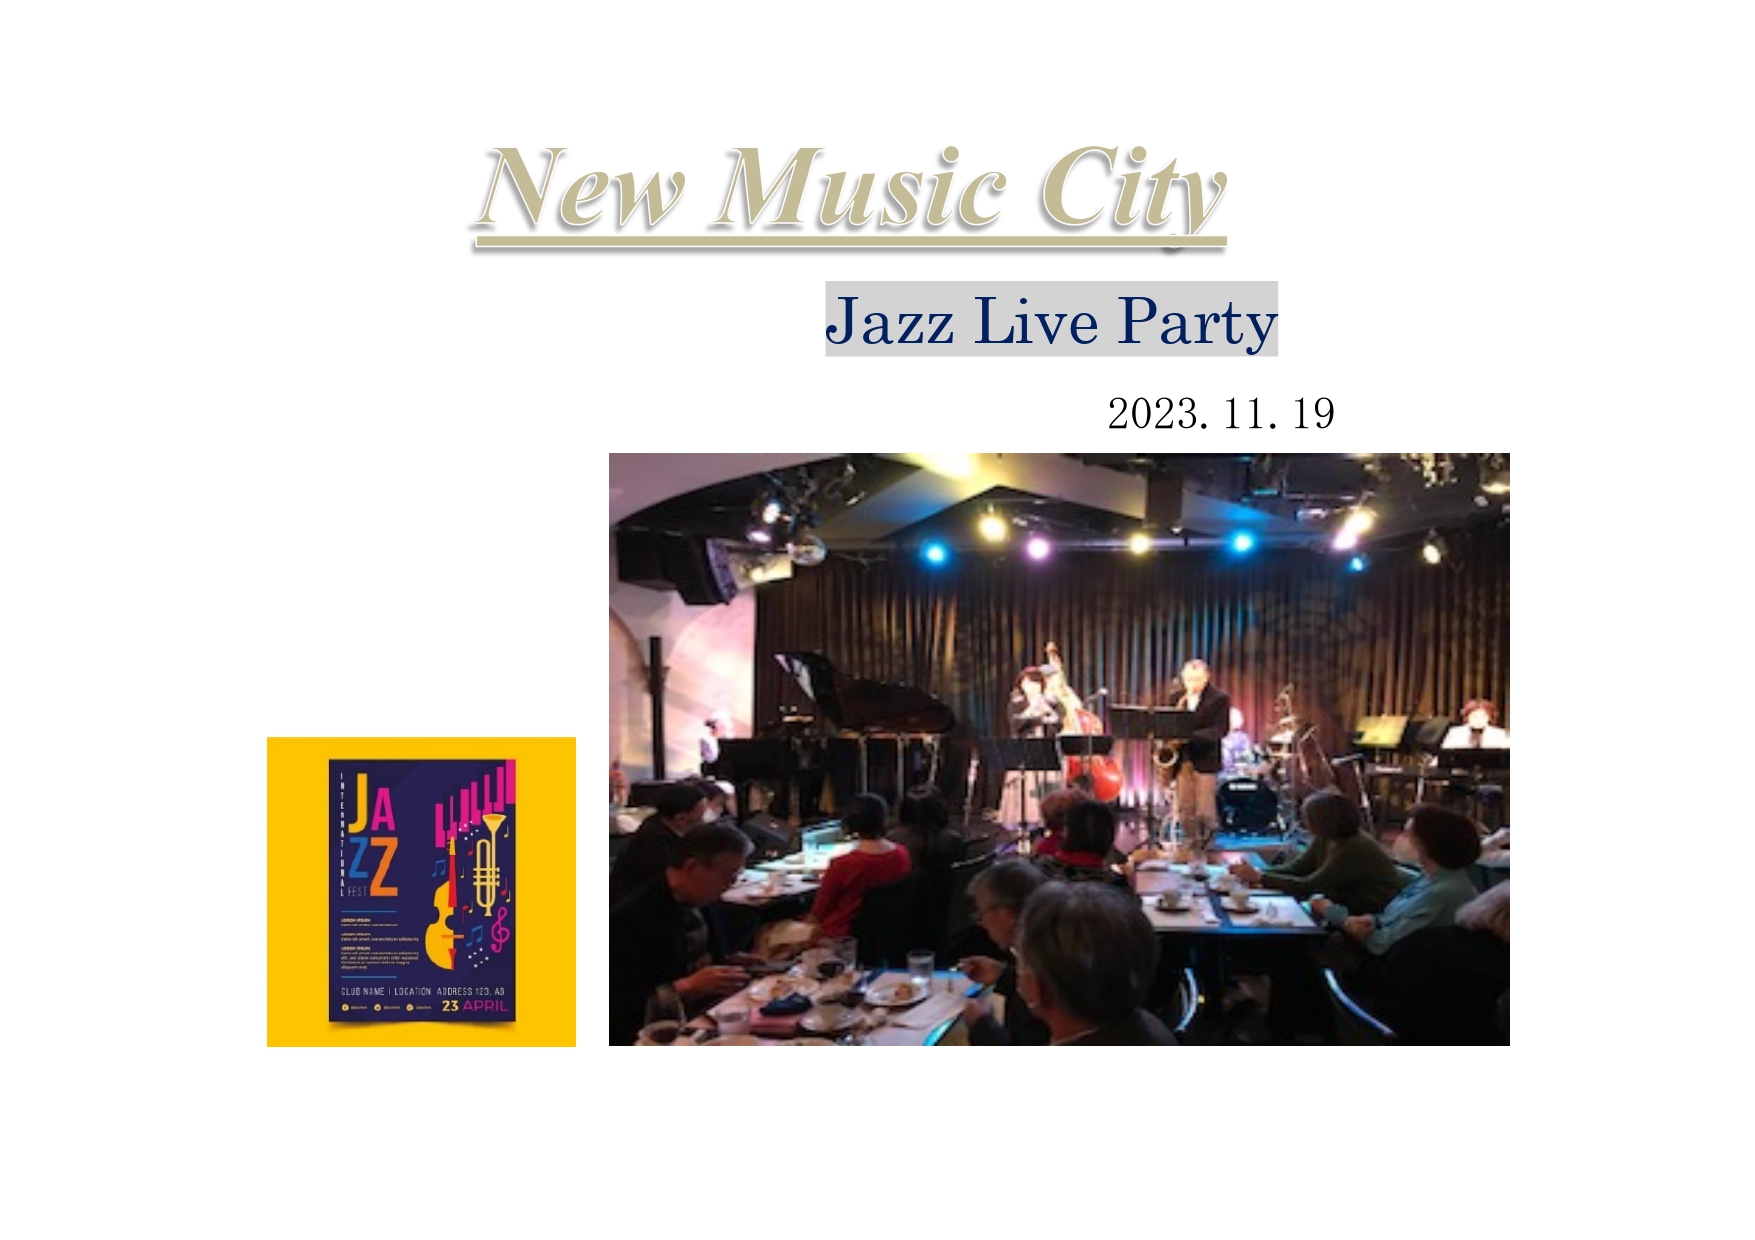 New Music City Jazz Live Party